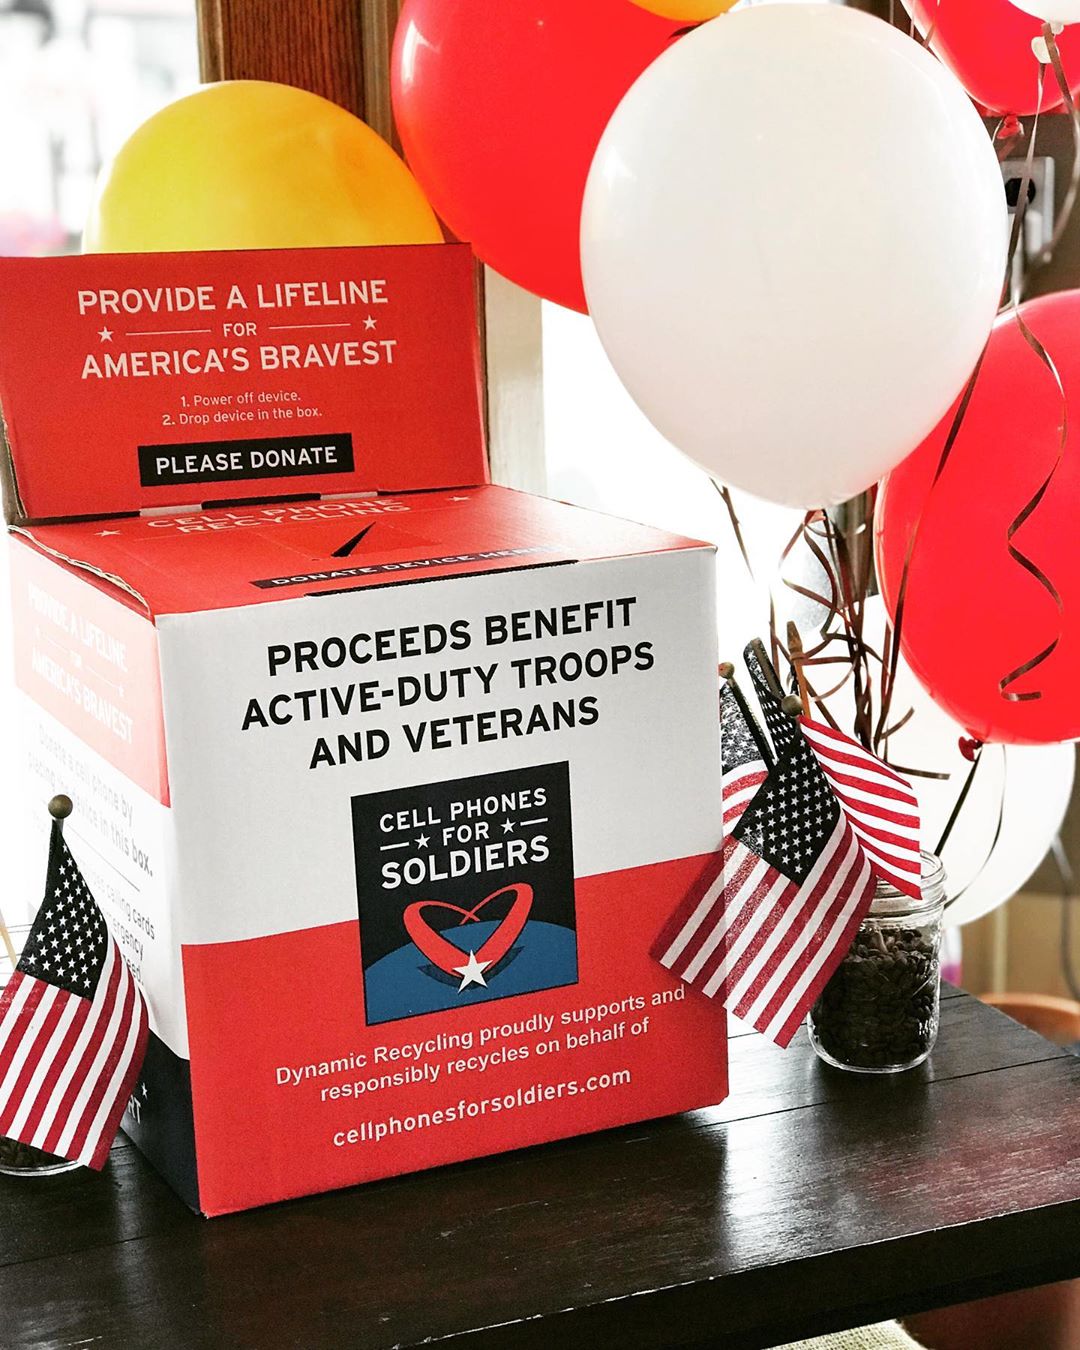 Red box by balloons for electric donations. Photo by Instagram user @amackswell